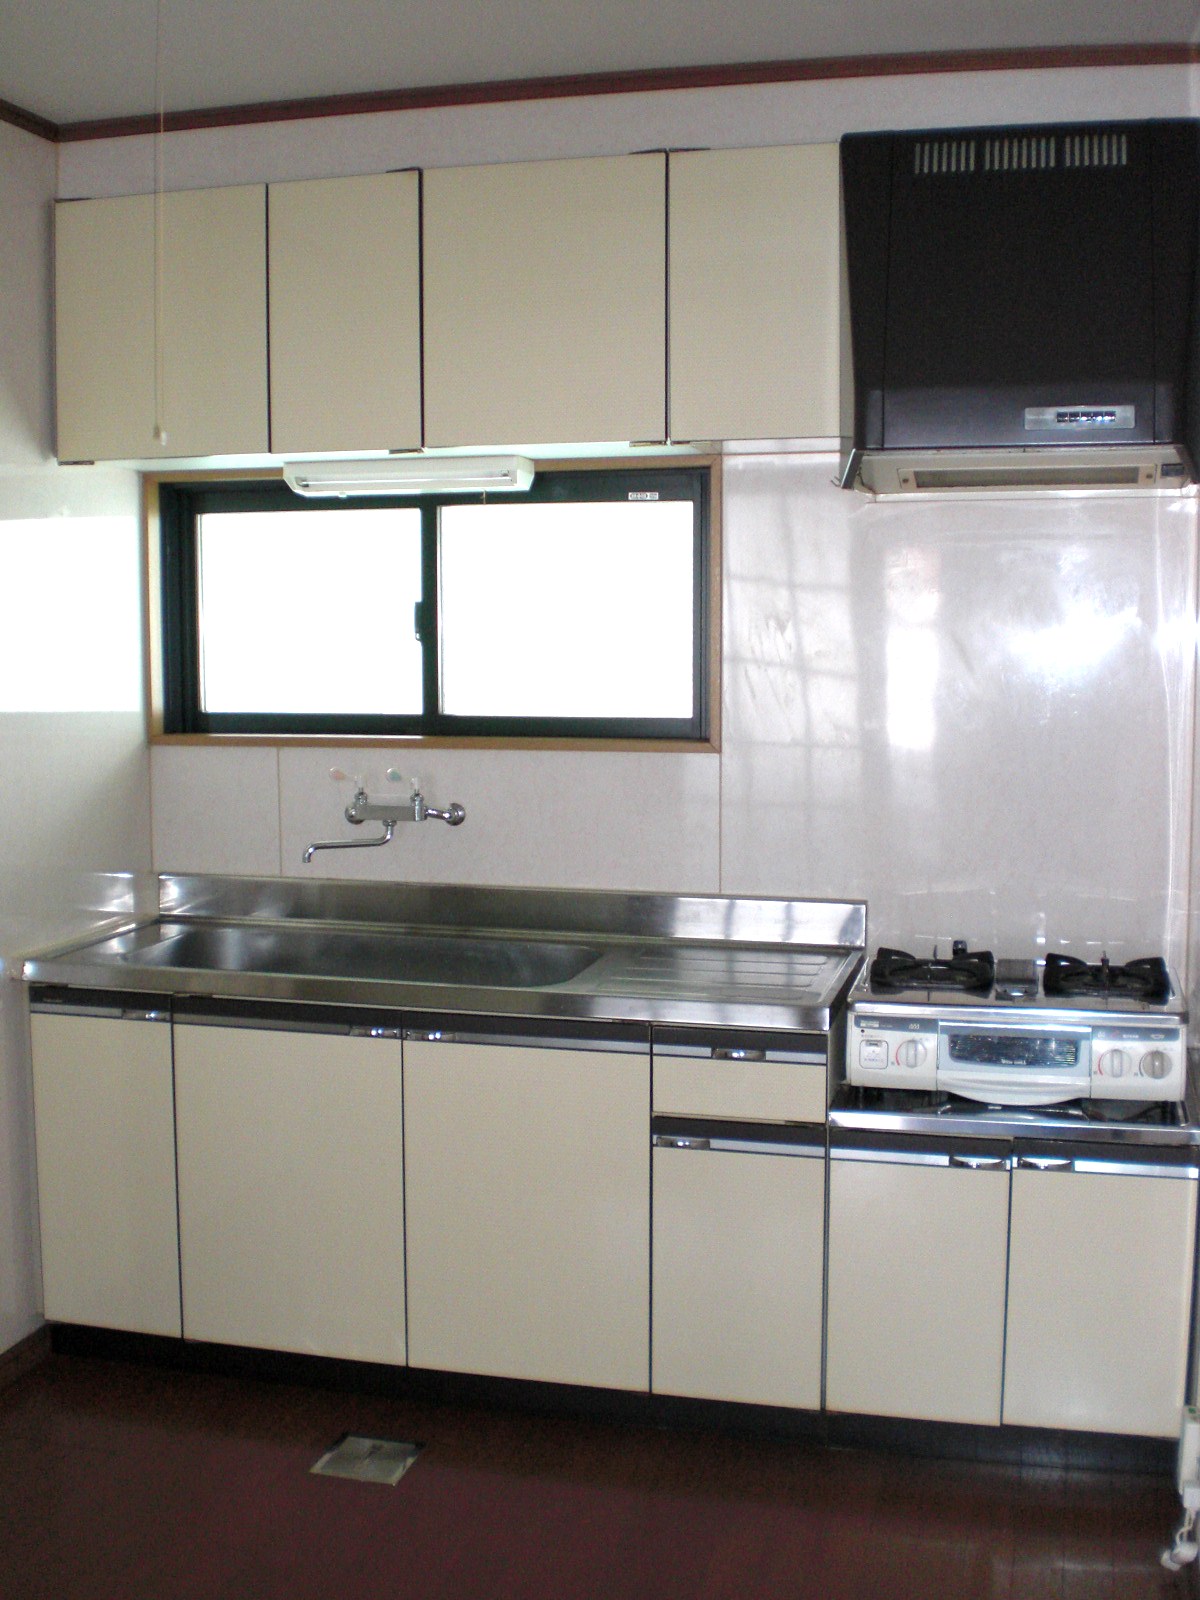 Kitchen. Large kitchen is equipped with gas stove